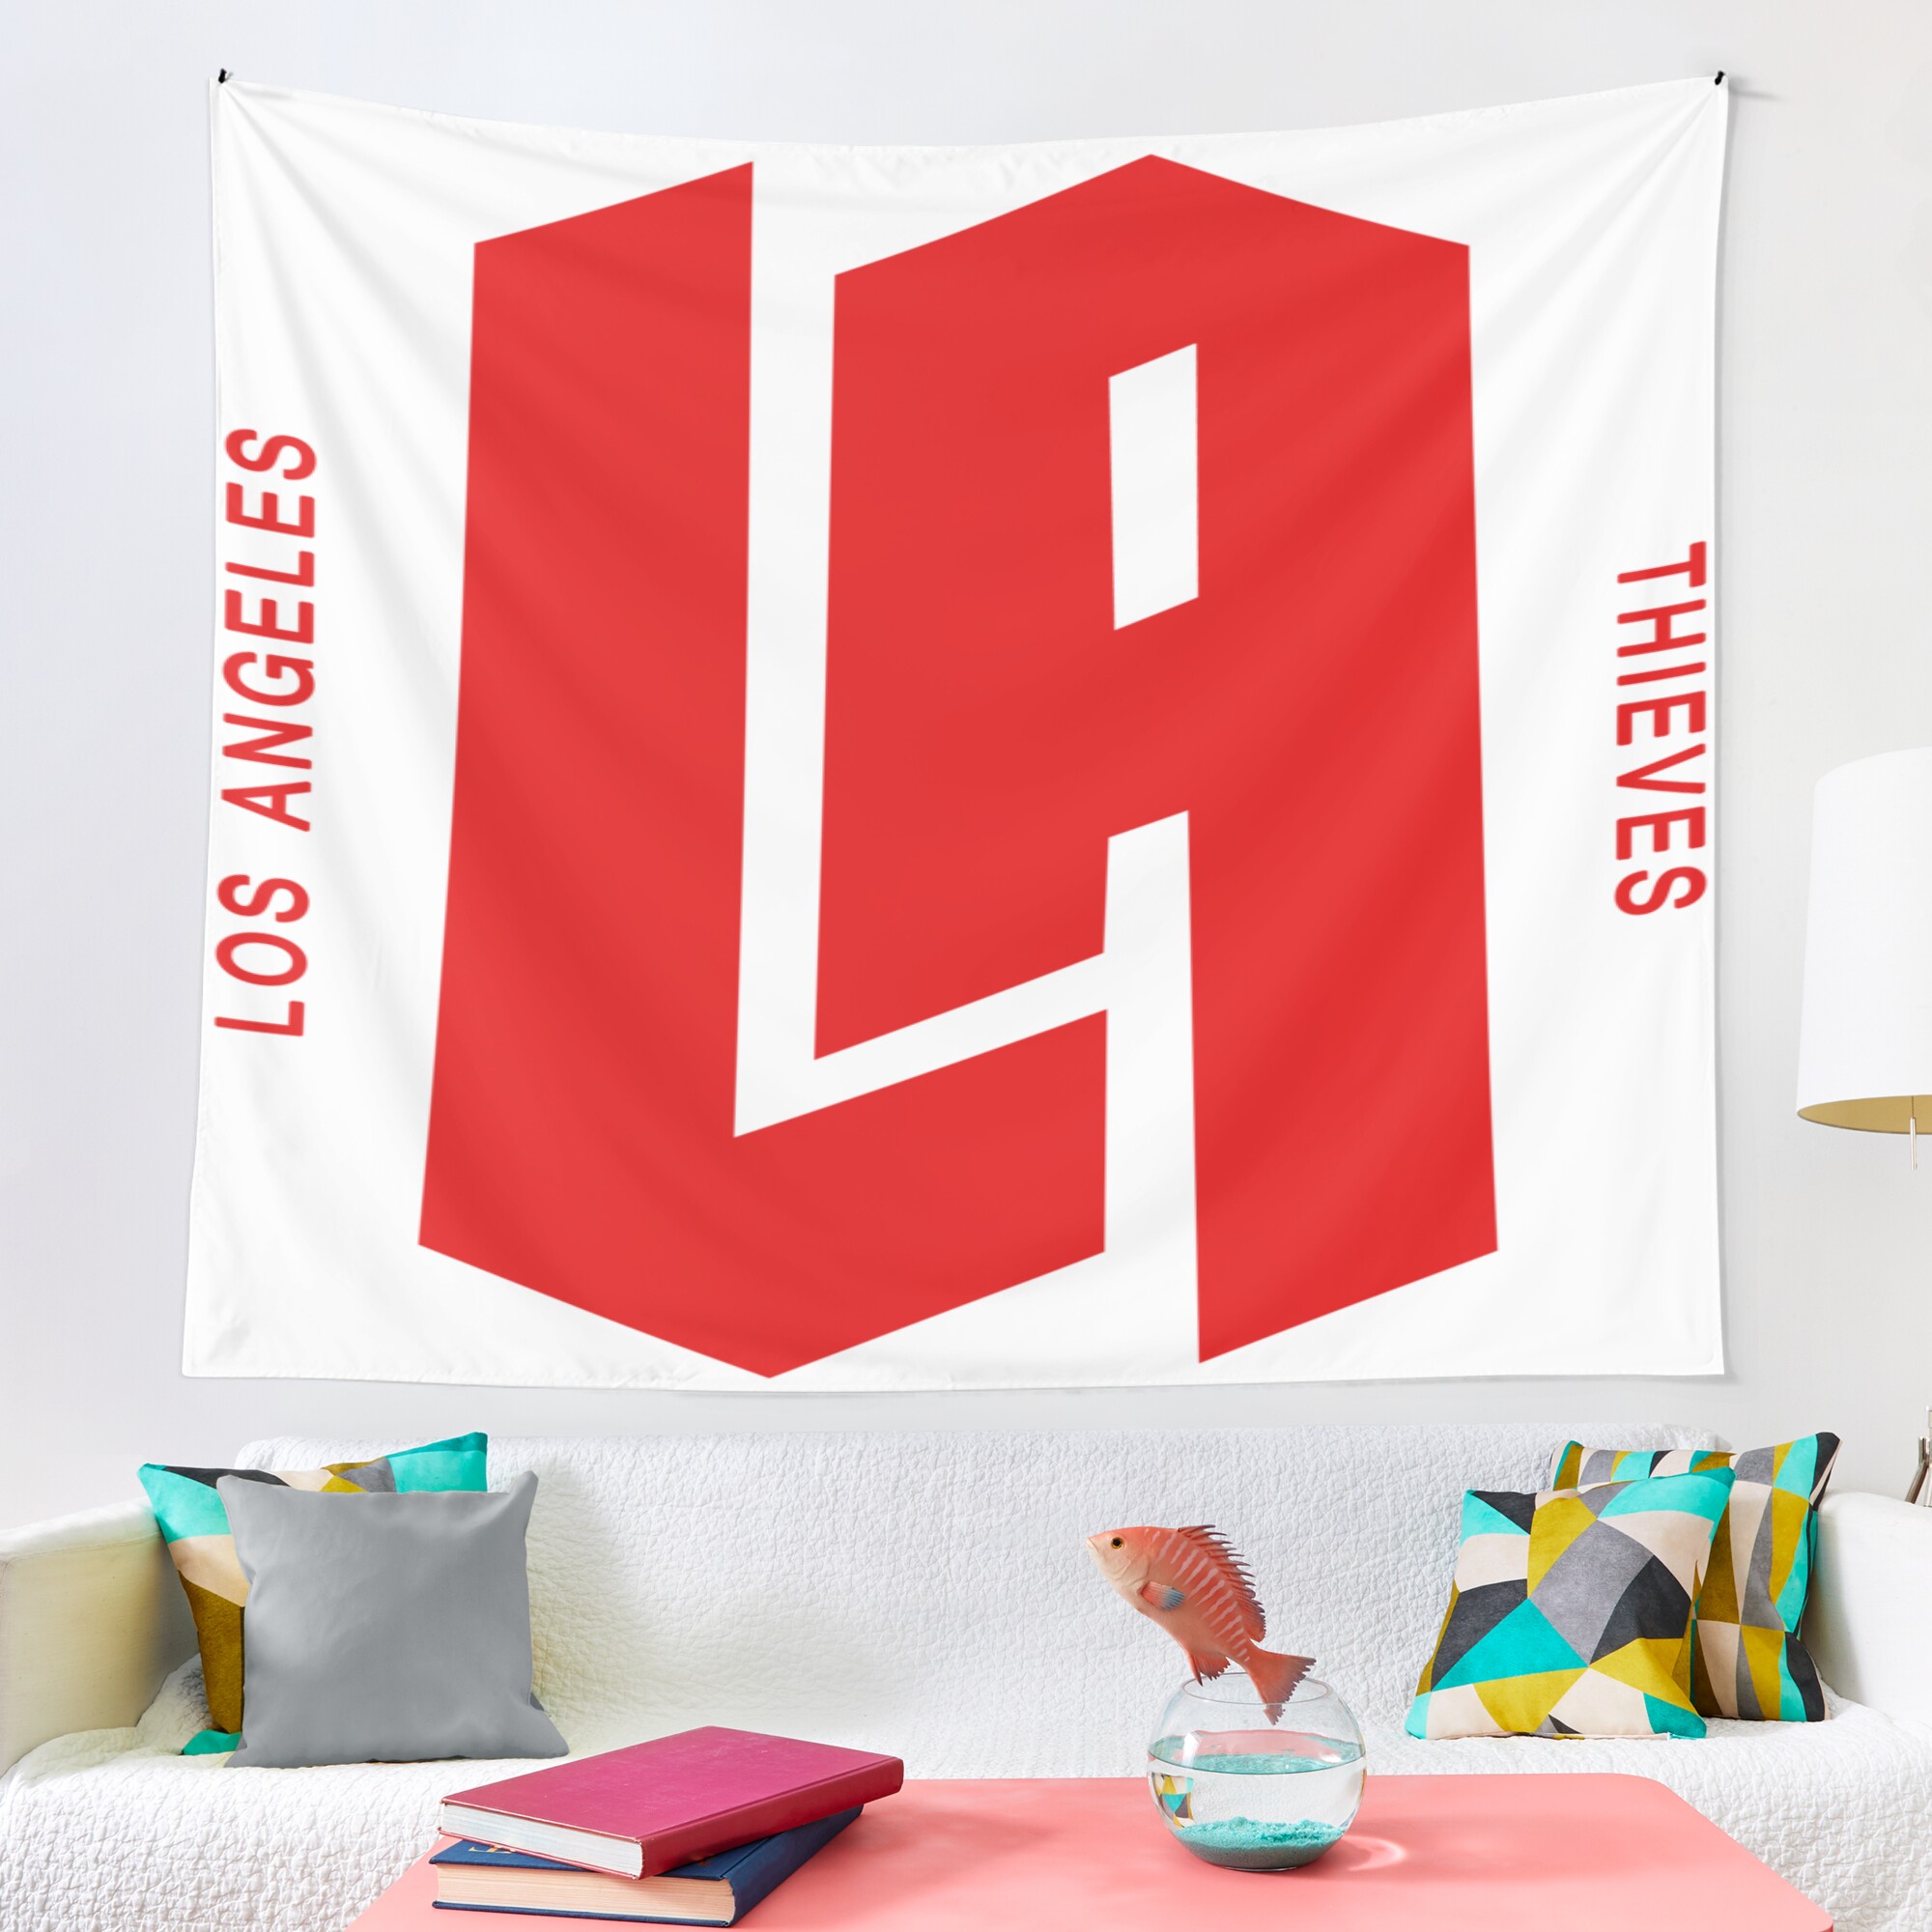 urtapestry lifestyle largesquare2000x2000 1 - 100 Thieves Shop